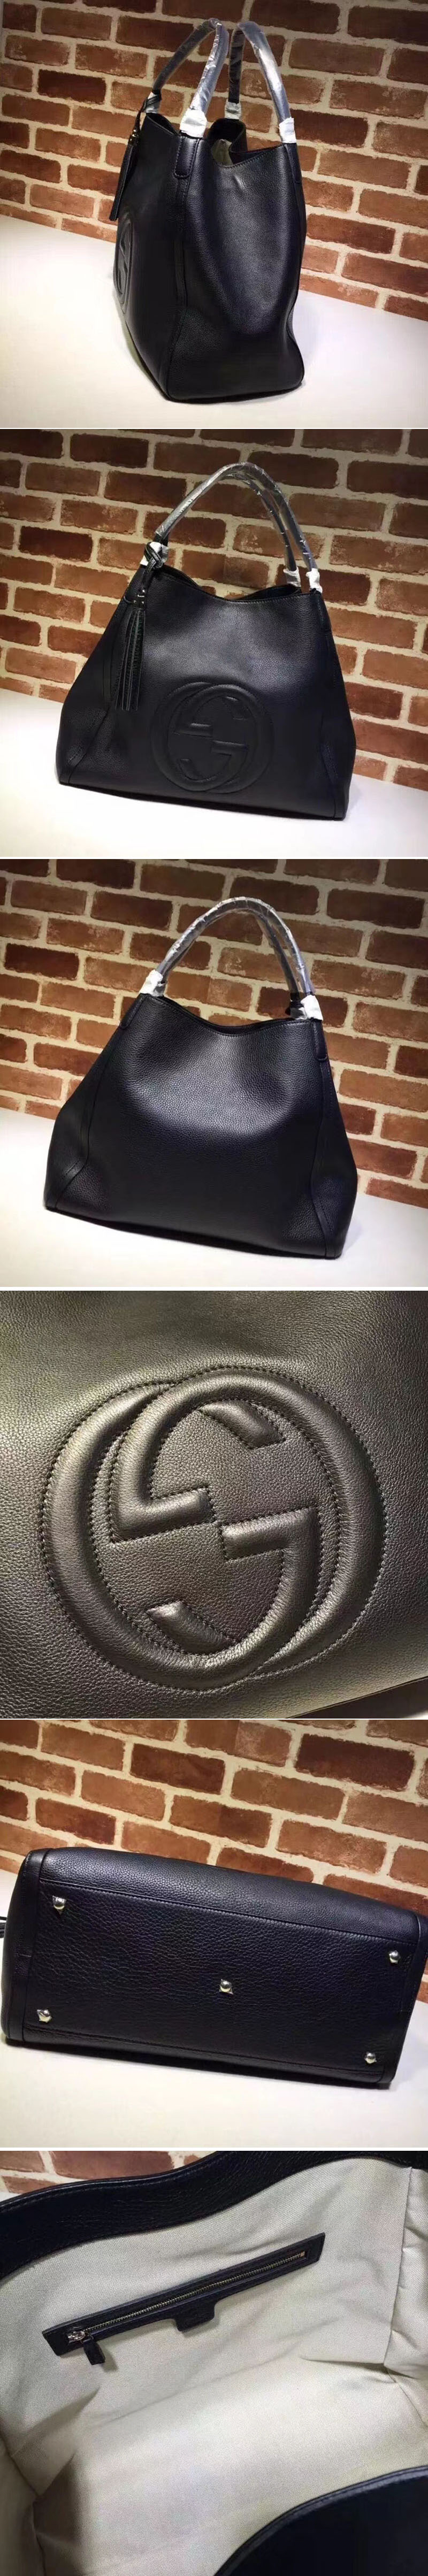 Replica Gucci 282308 Soho Large Leather Shoulder Bags Black